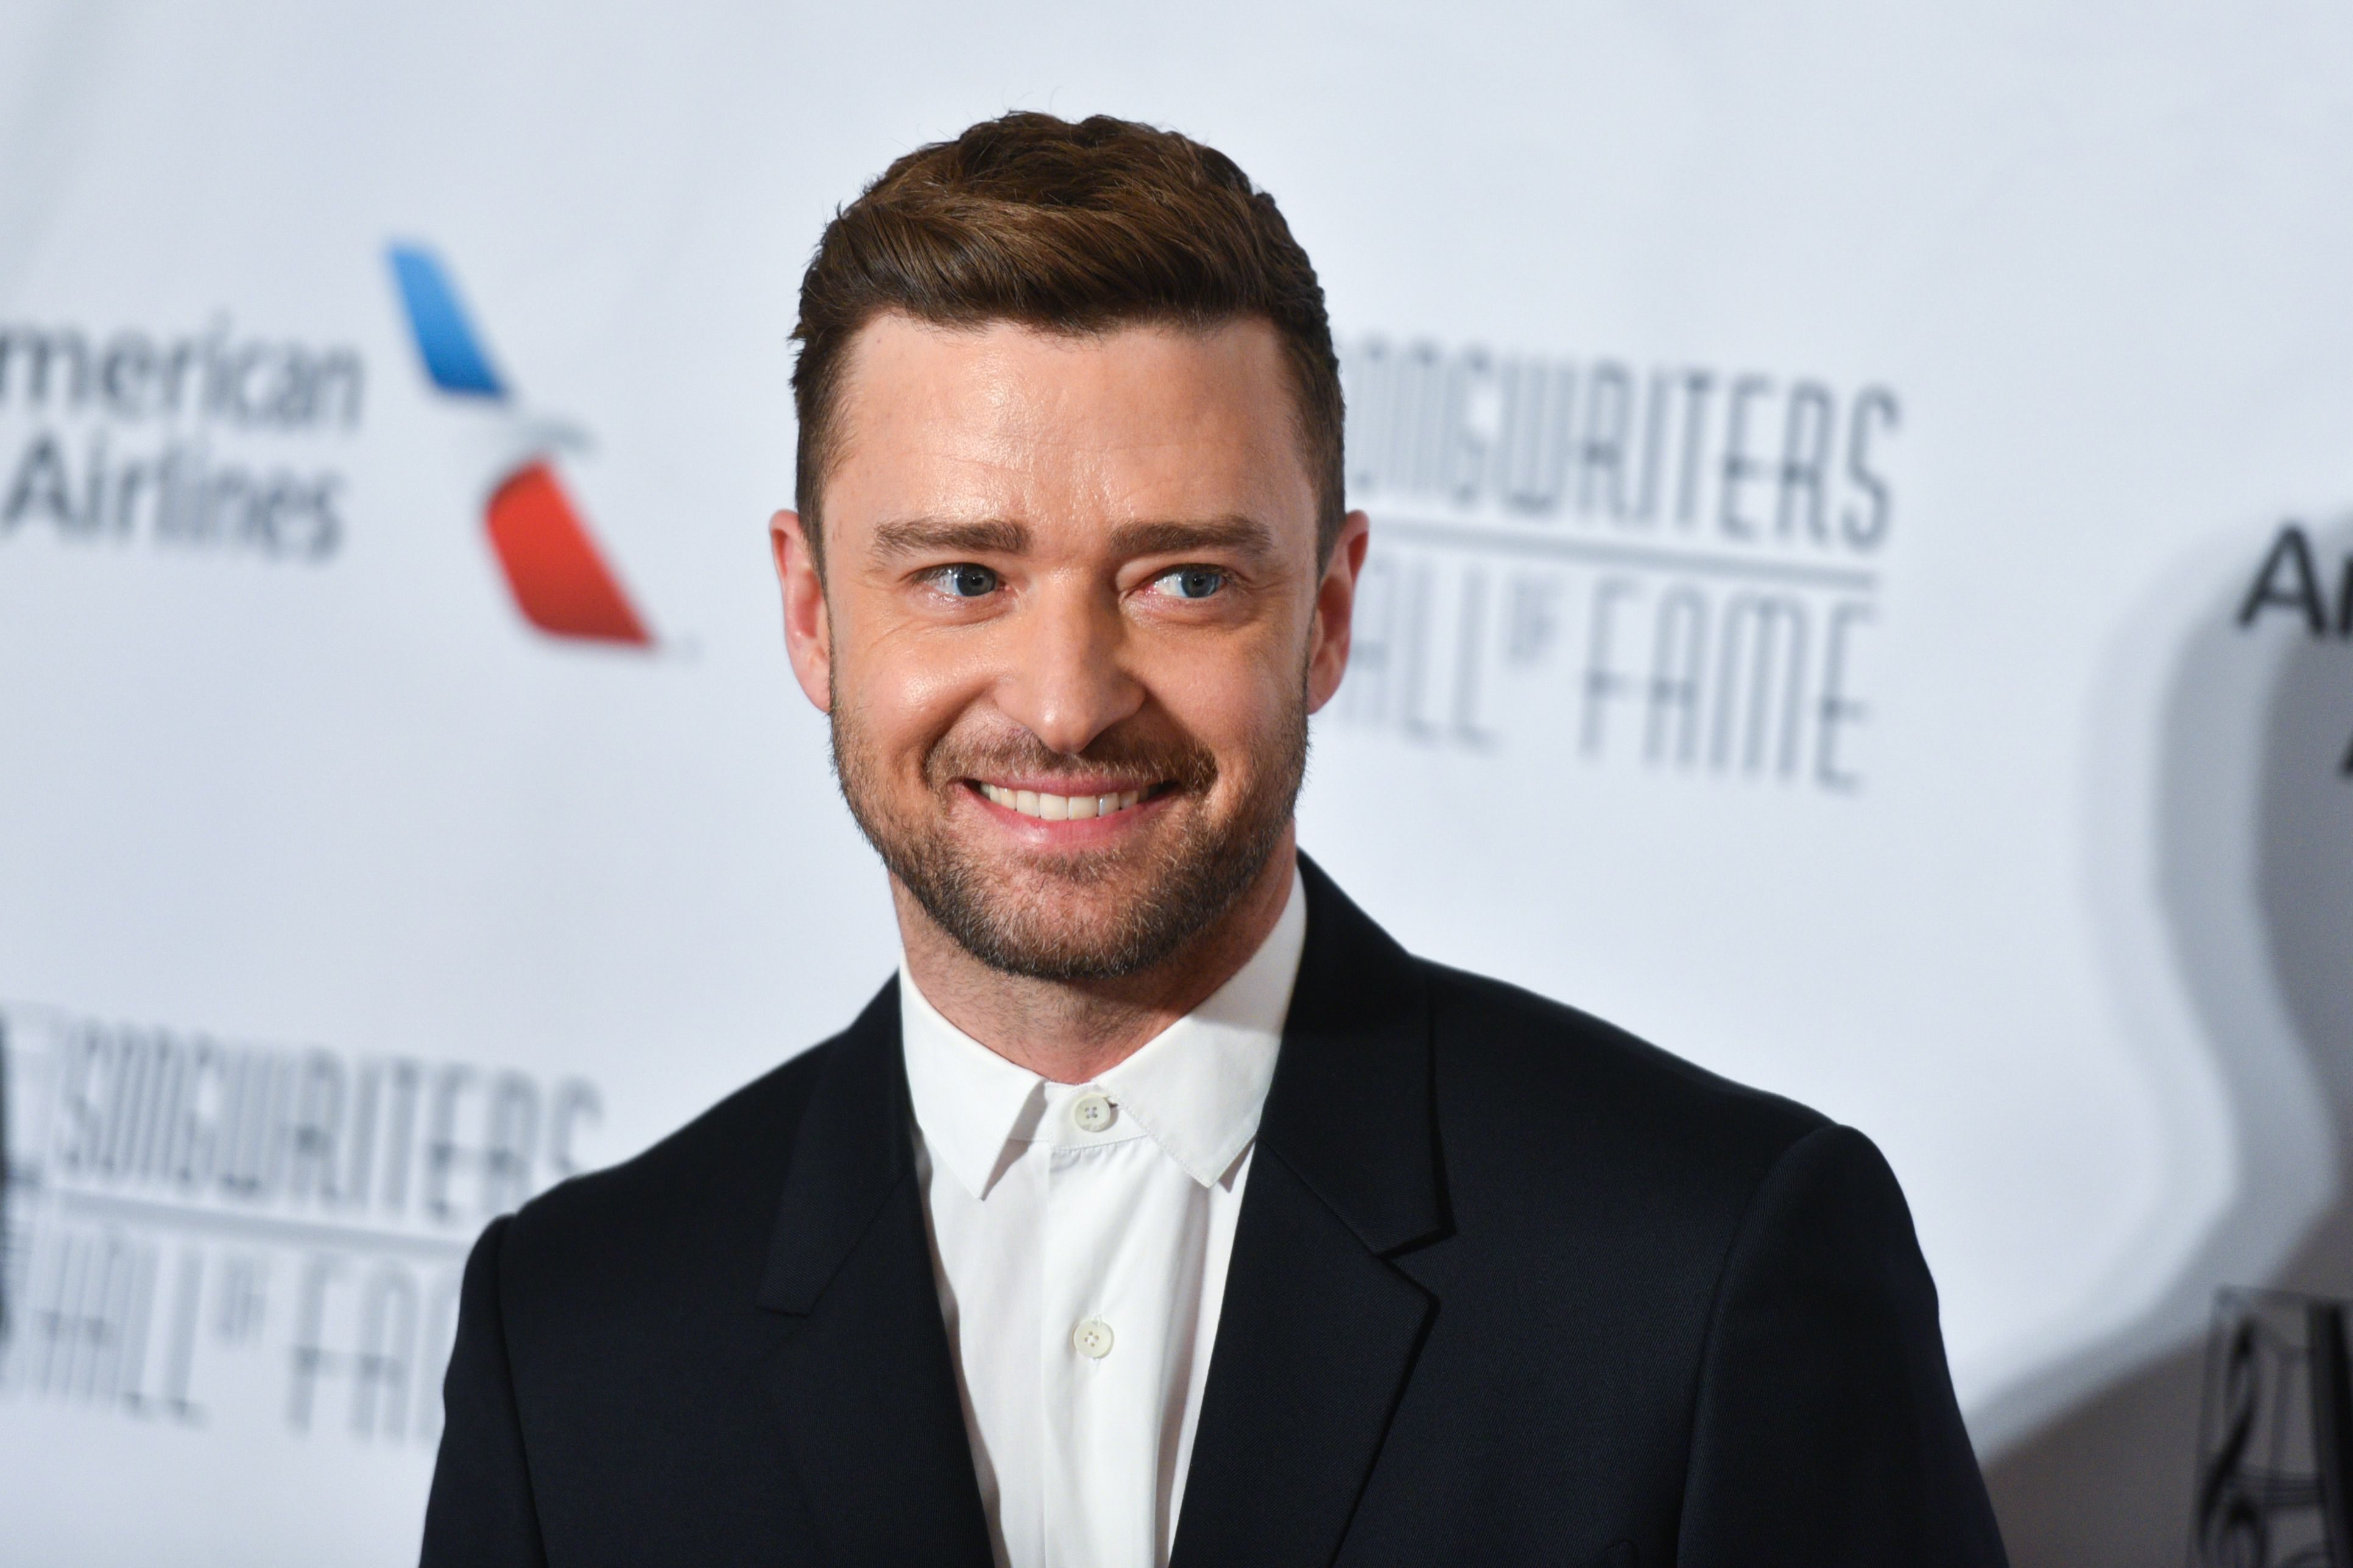 Mandatory Credit: Photo by Erik Pendzich/Shutterstock (10310162ak) Justin Timberlake Songwriters Hall of Fame Annual Induction and Awards Gala, Arrivals, Marriott Marquis Hotel, New York, USA - 13 Jun 2019